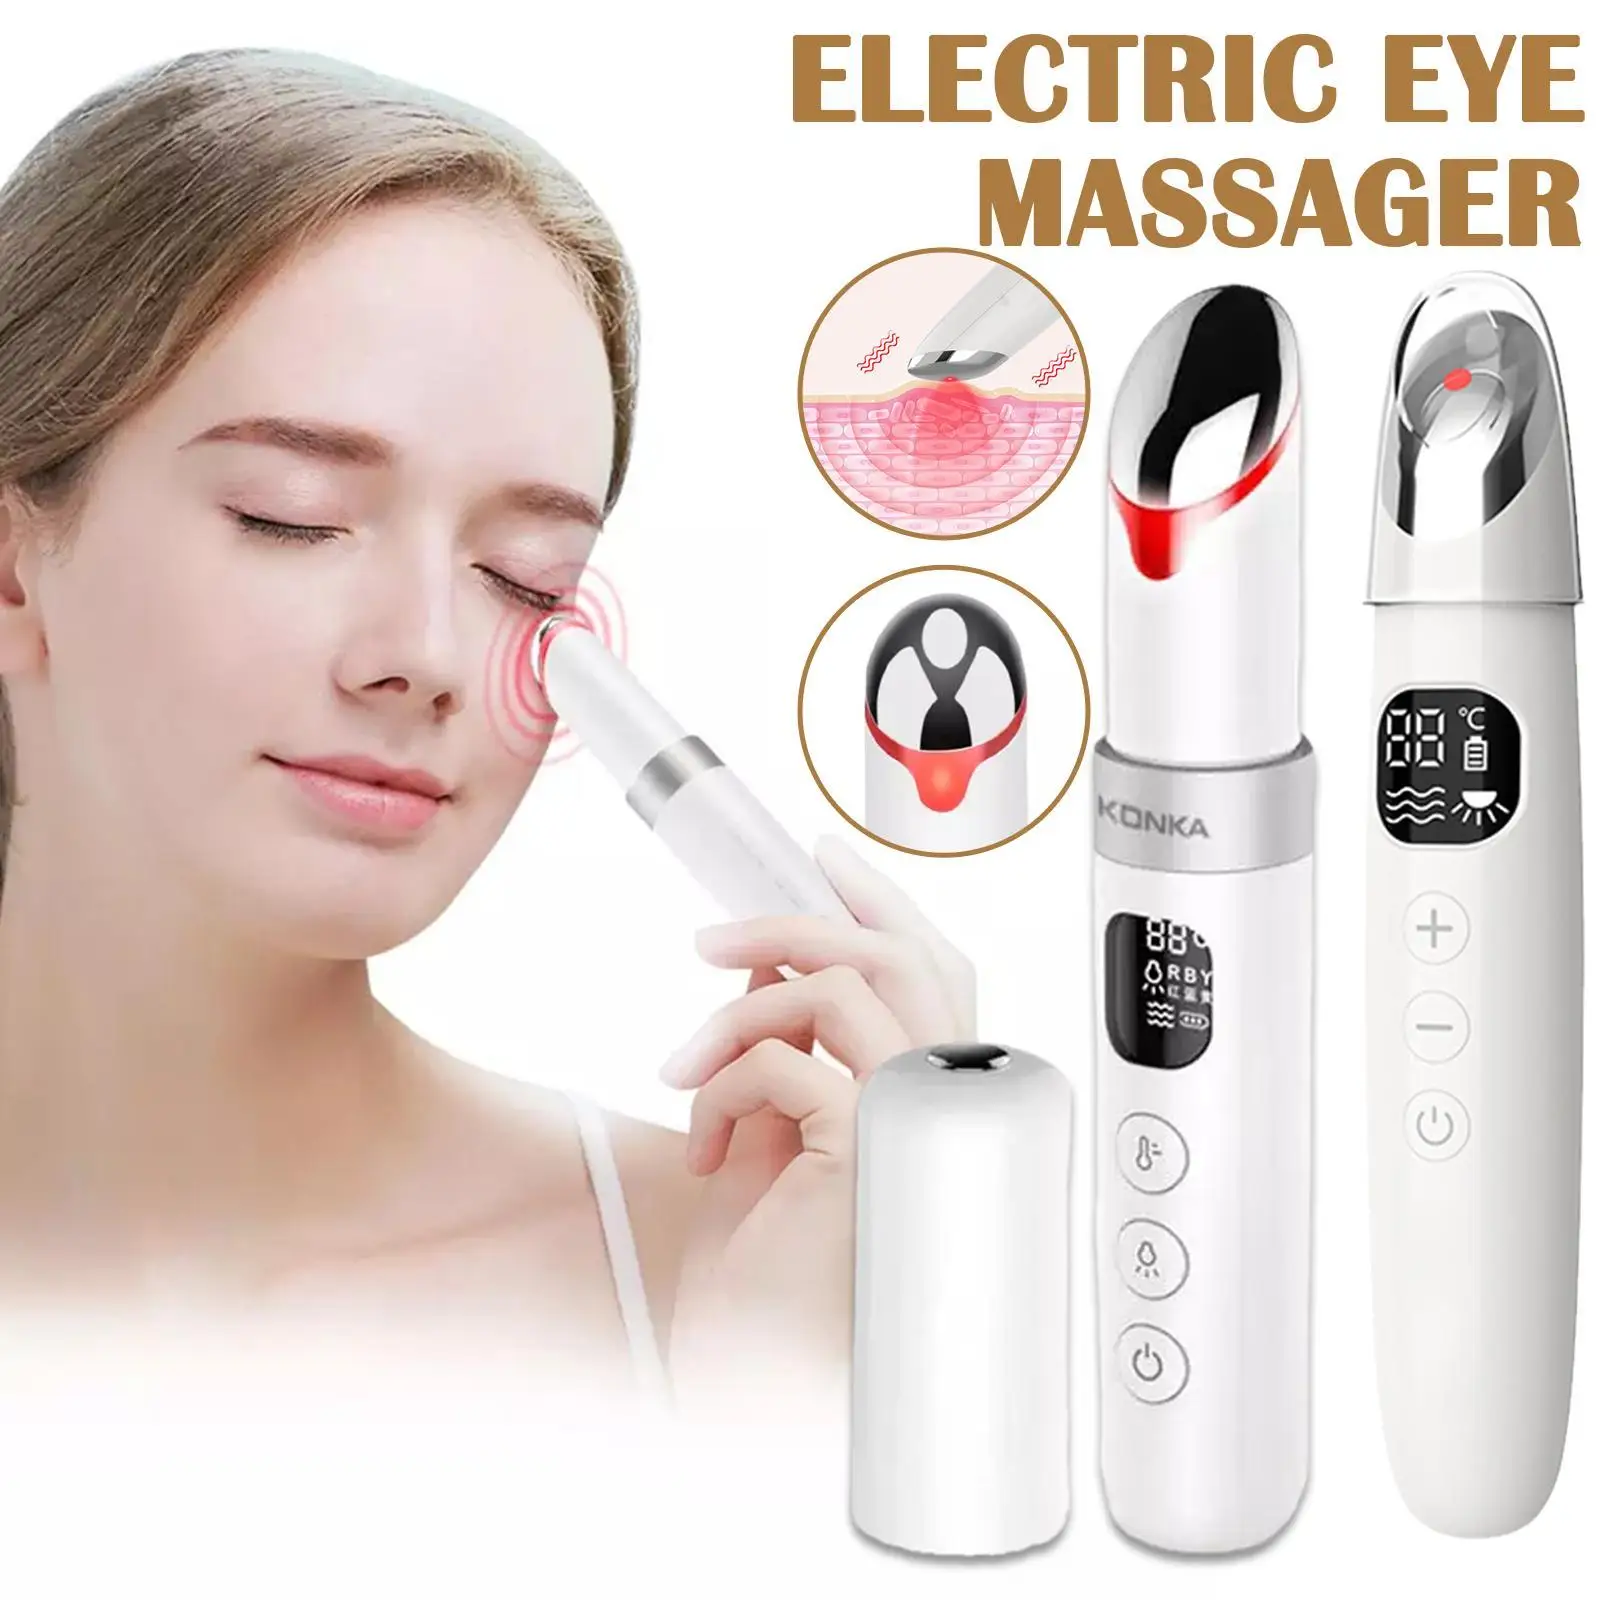 

Electric Eye Massager EMS Eye Skin Lift Anti Age Wrinkle Skin Care Tool Vibration 45℃ Hot Massage Relax Eyes Photo Therapy